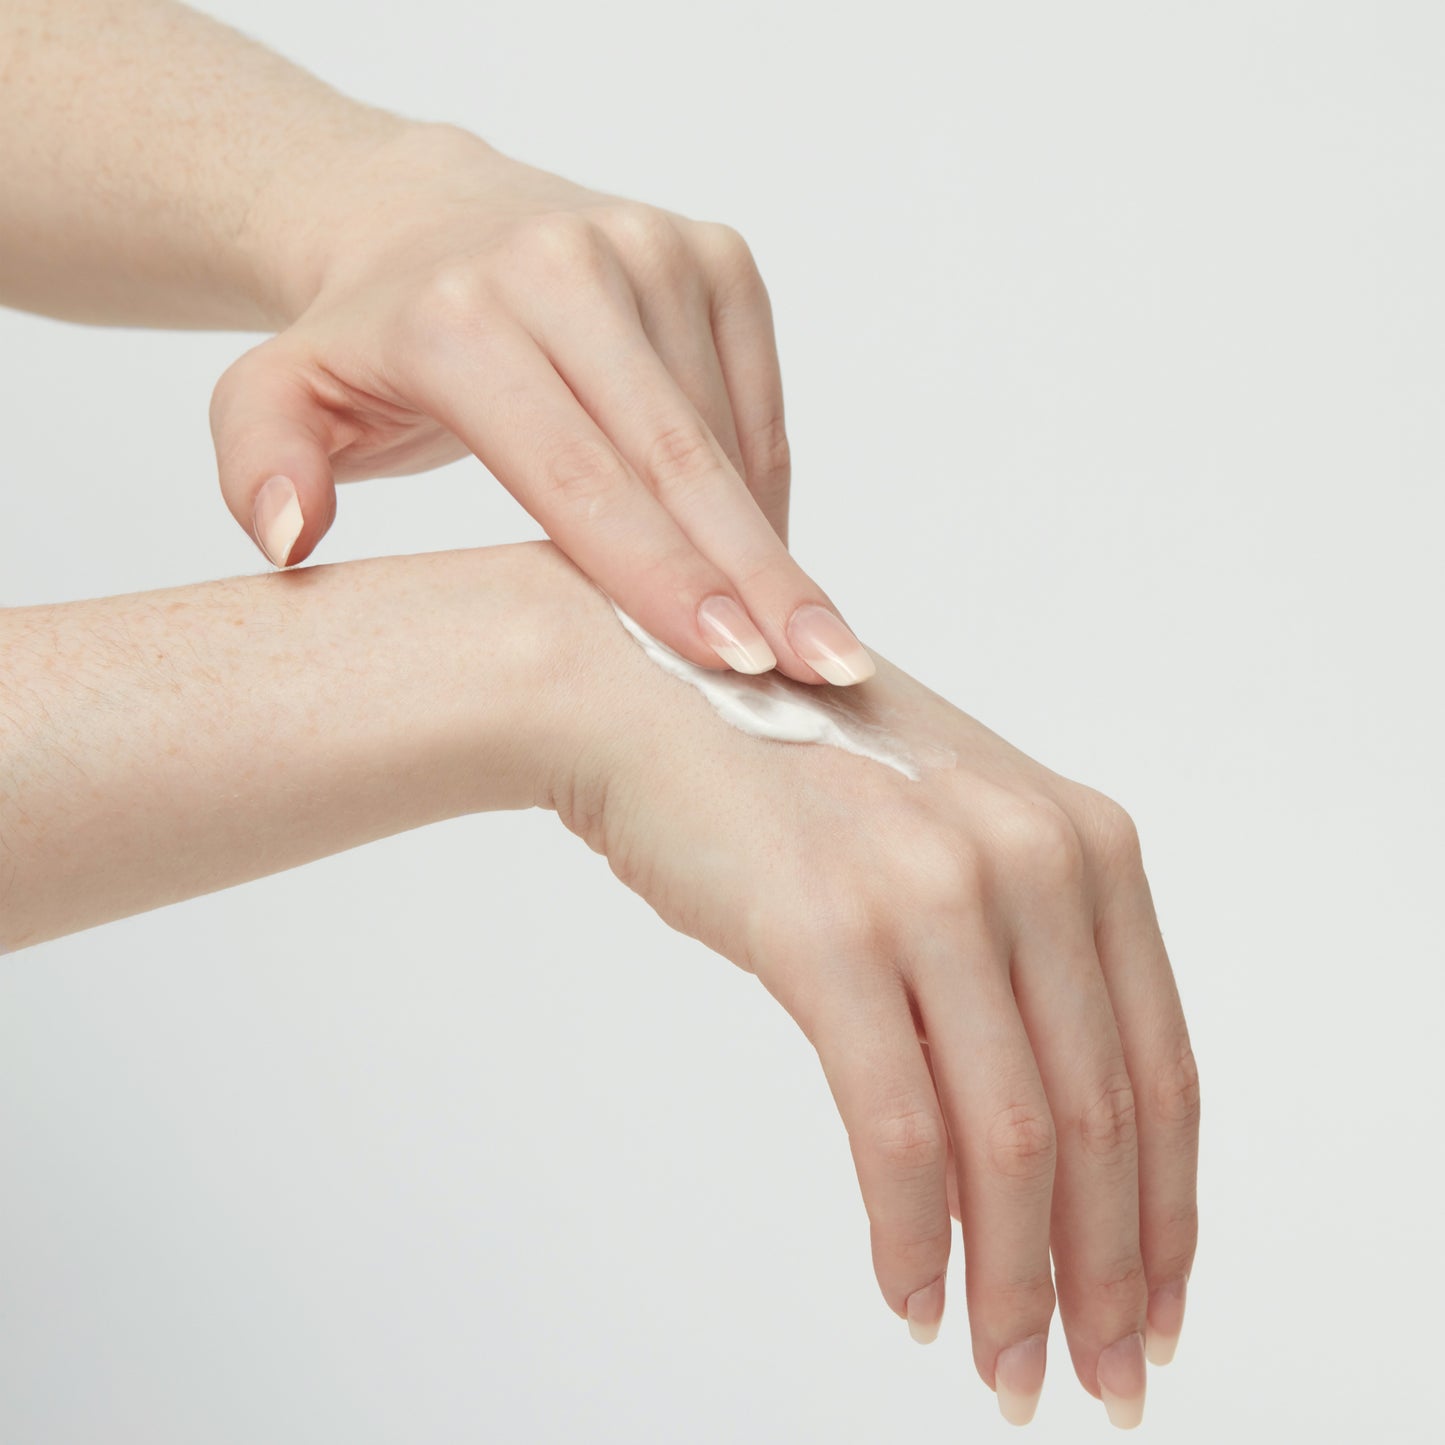 Rose Hand Cream with Vitamin E Being Applied To The Back Of A Hand 